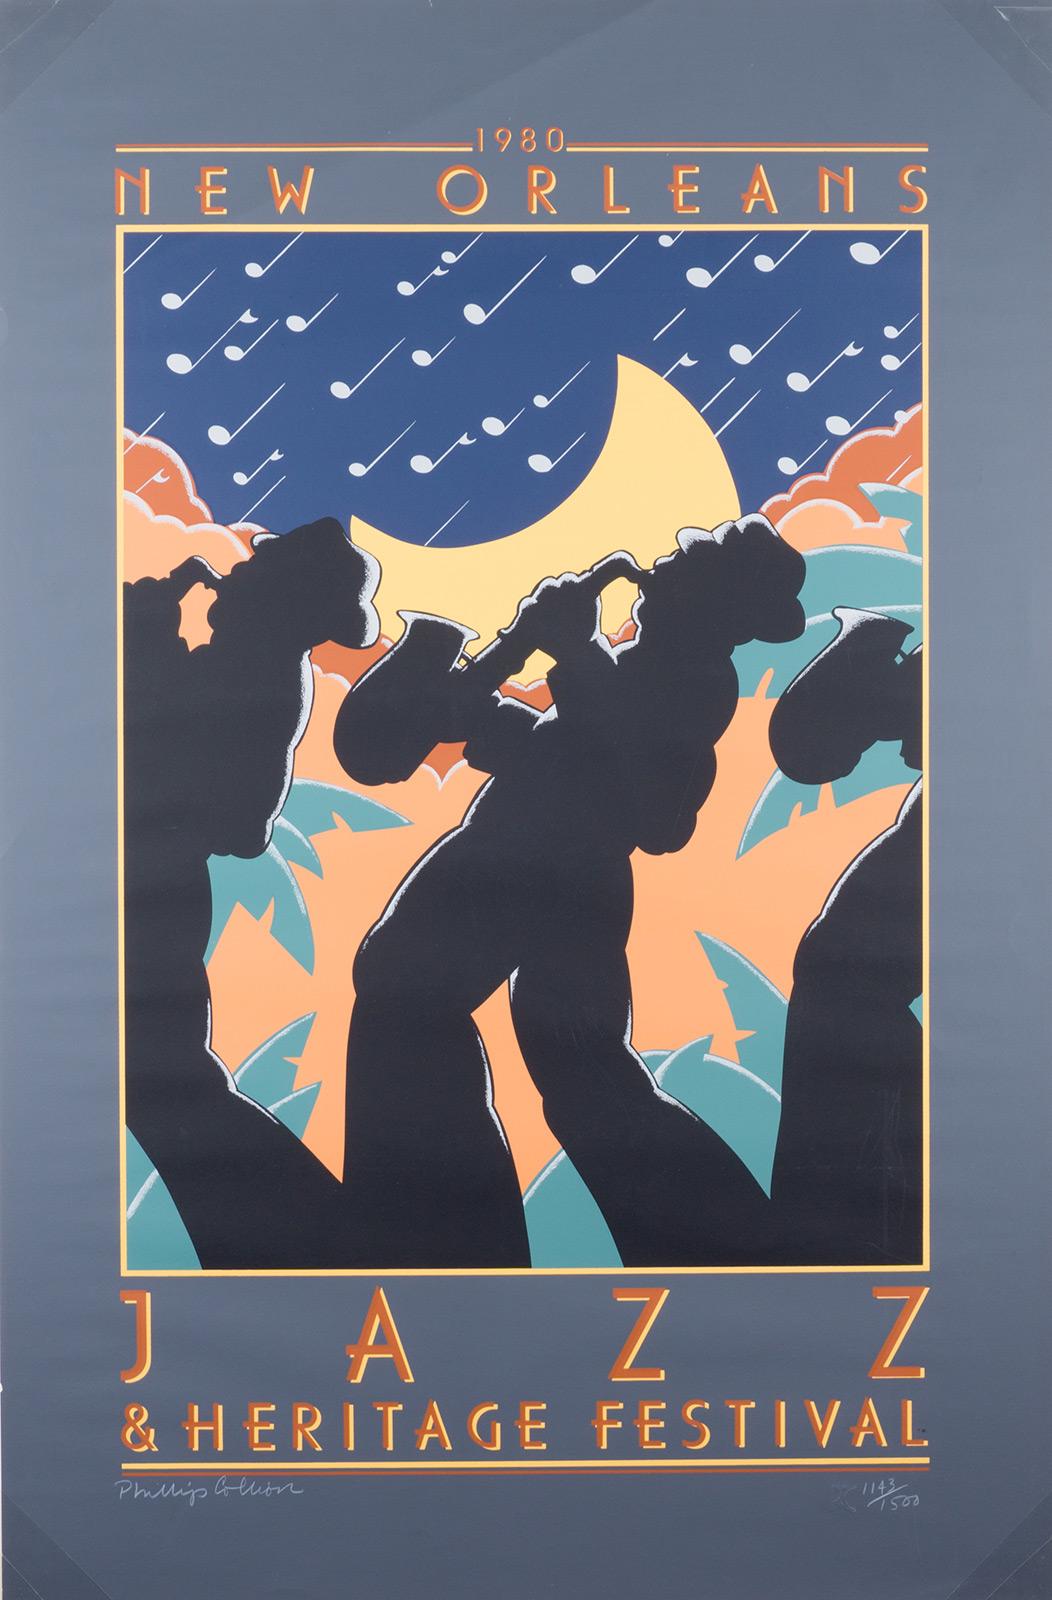 New Orleans Jazz and Heritage Festival Poster - 1980 - Print by Phillip Collier